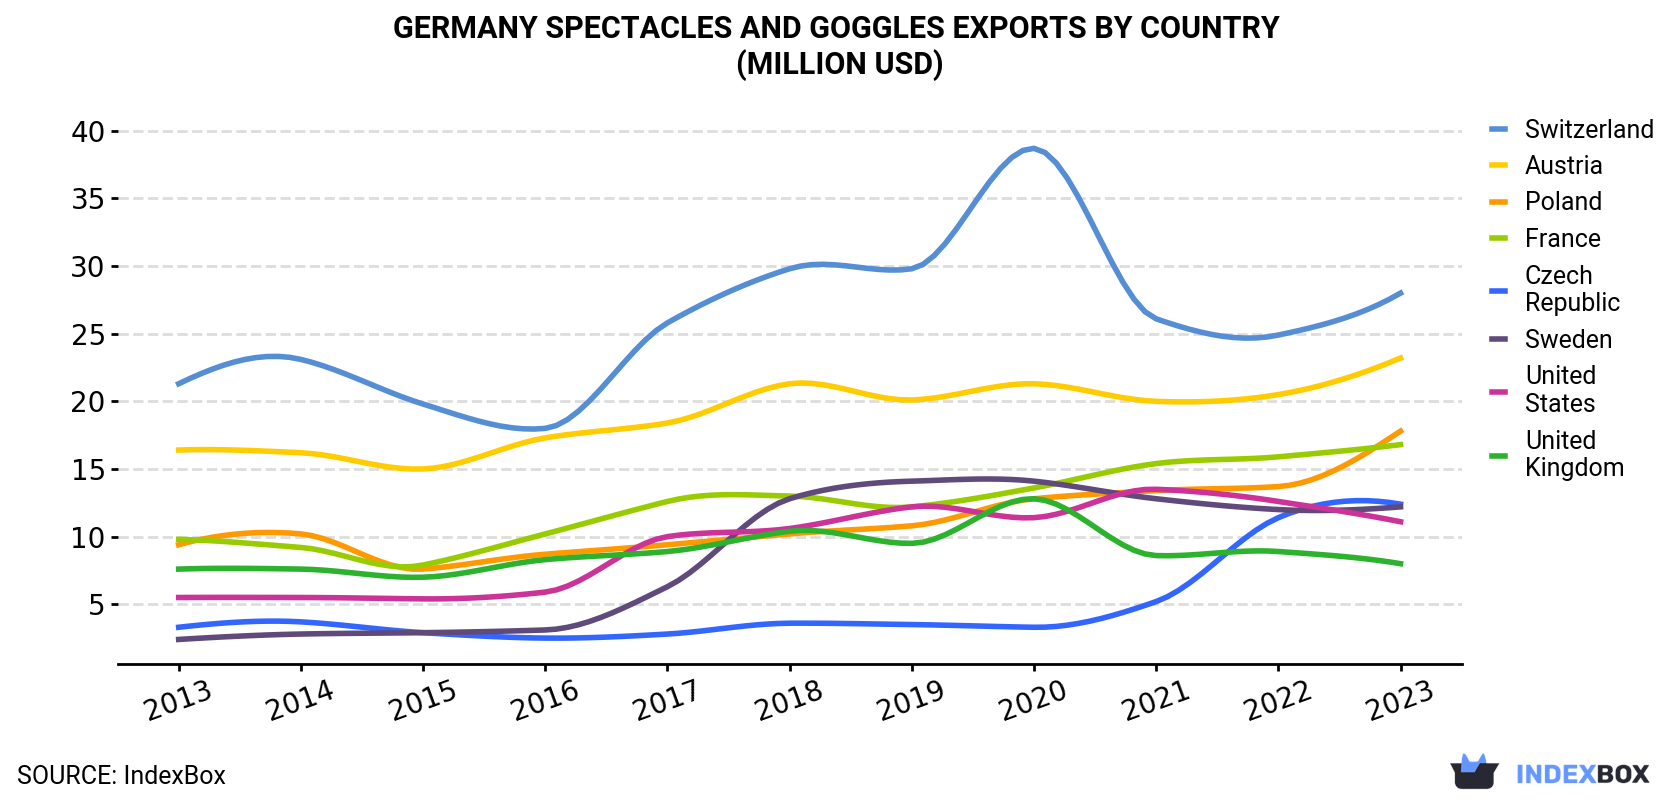 Germany Spectacles And Goggles Exports By Country (Million USD)